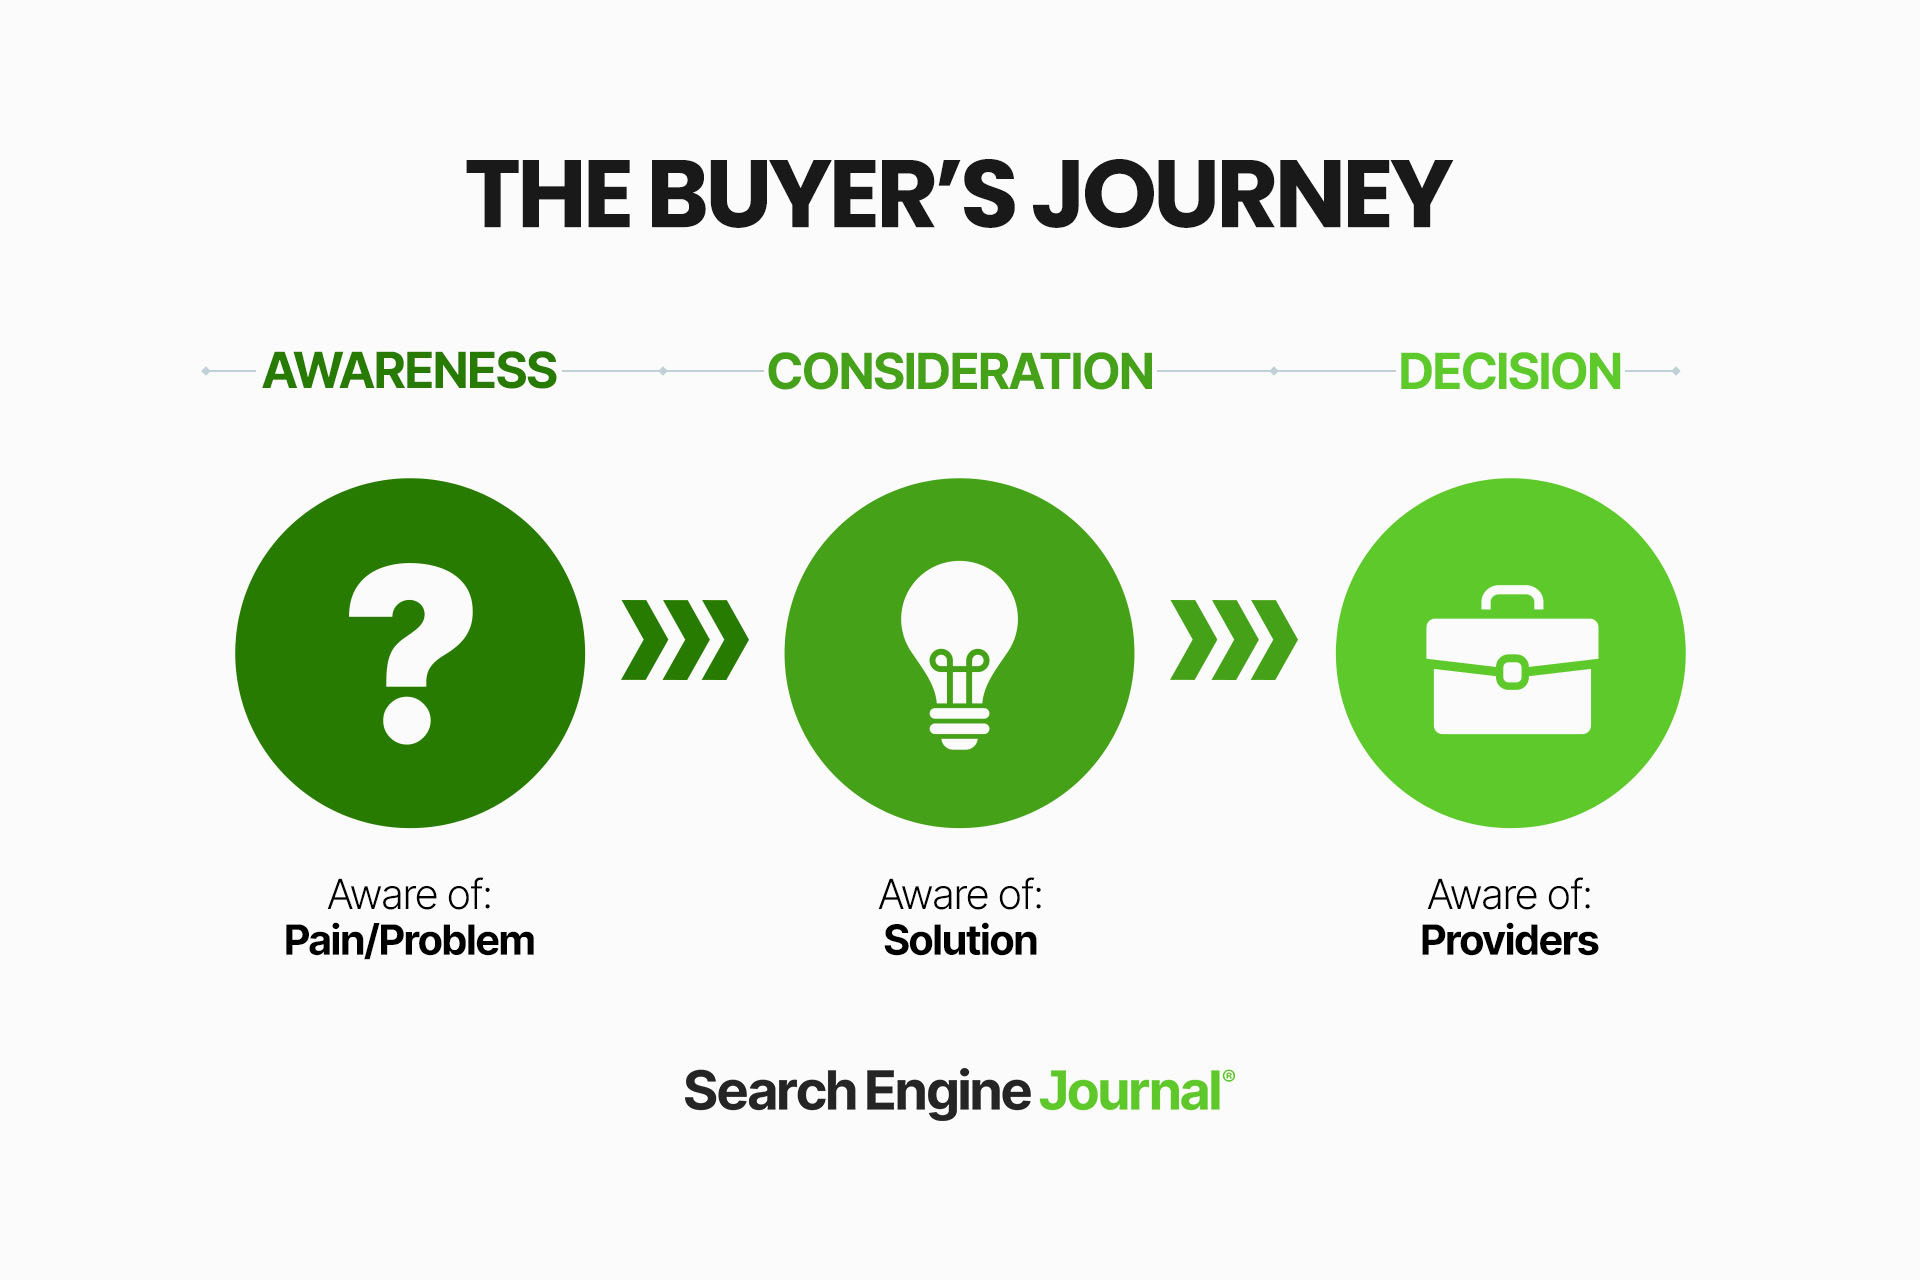 a chart of the buyer's journey, moving from "awareness" in which the audience has a problem, to "consideration" when they become aware of solutions, and finally to "decision" when they make a choice about a provider.